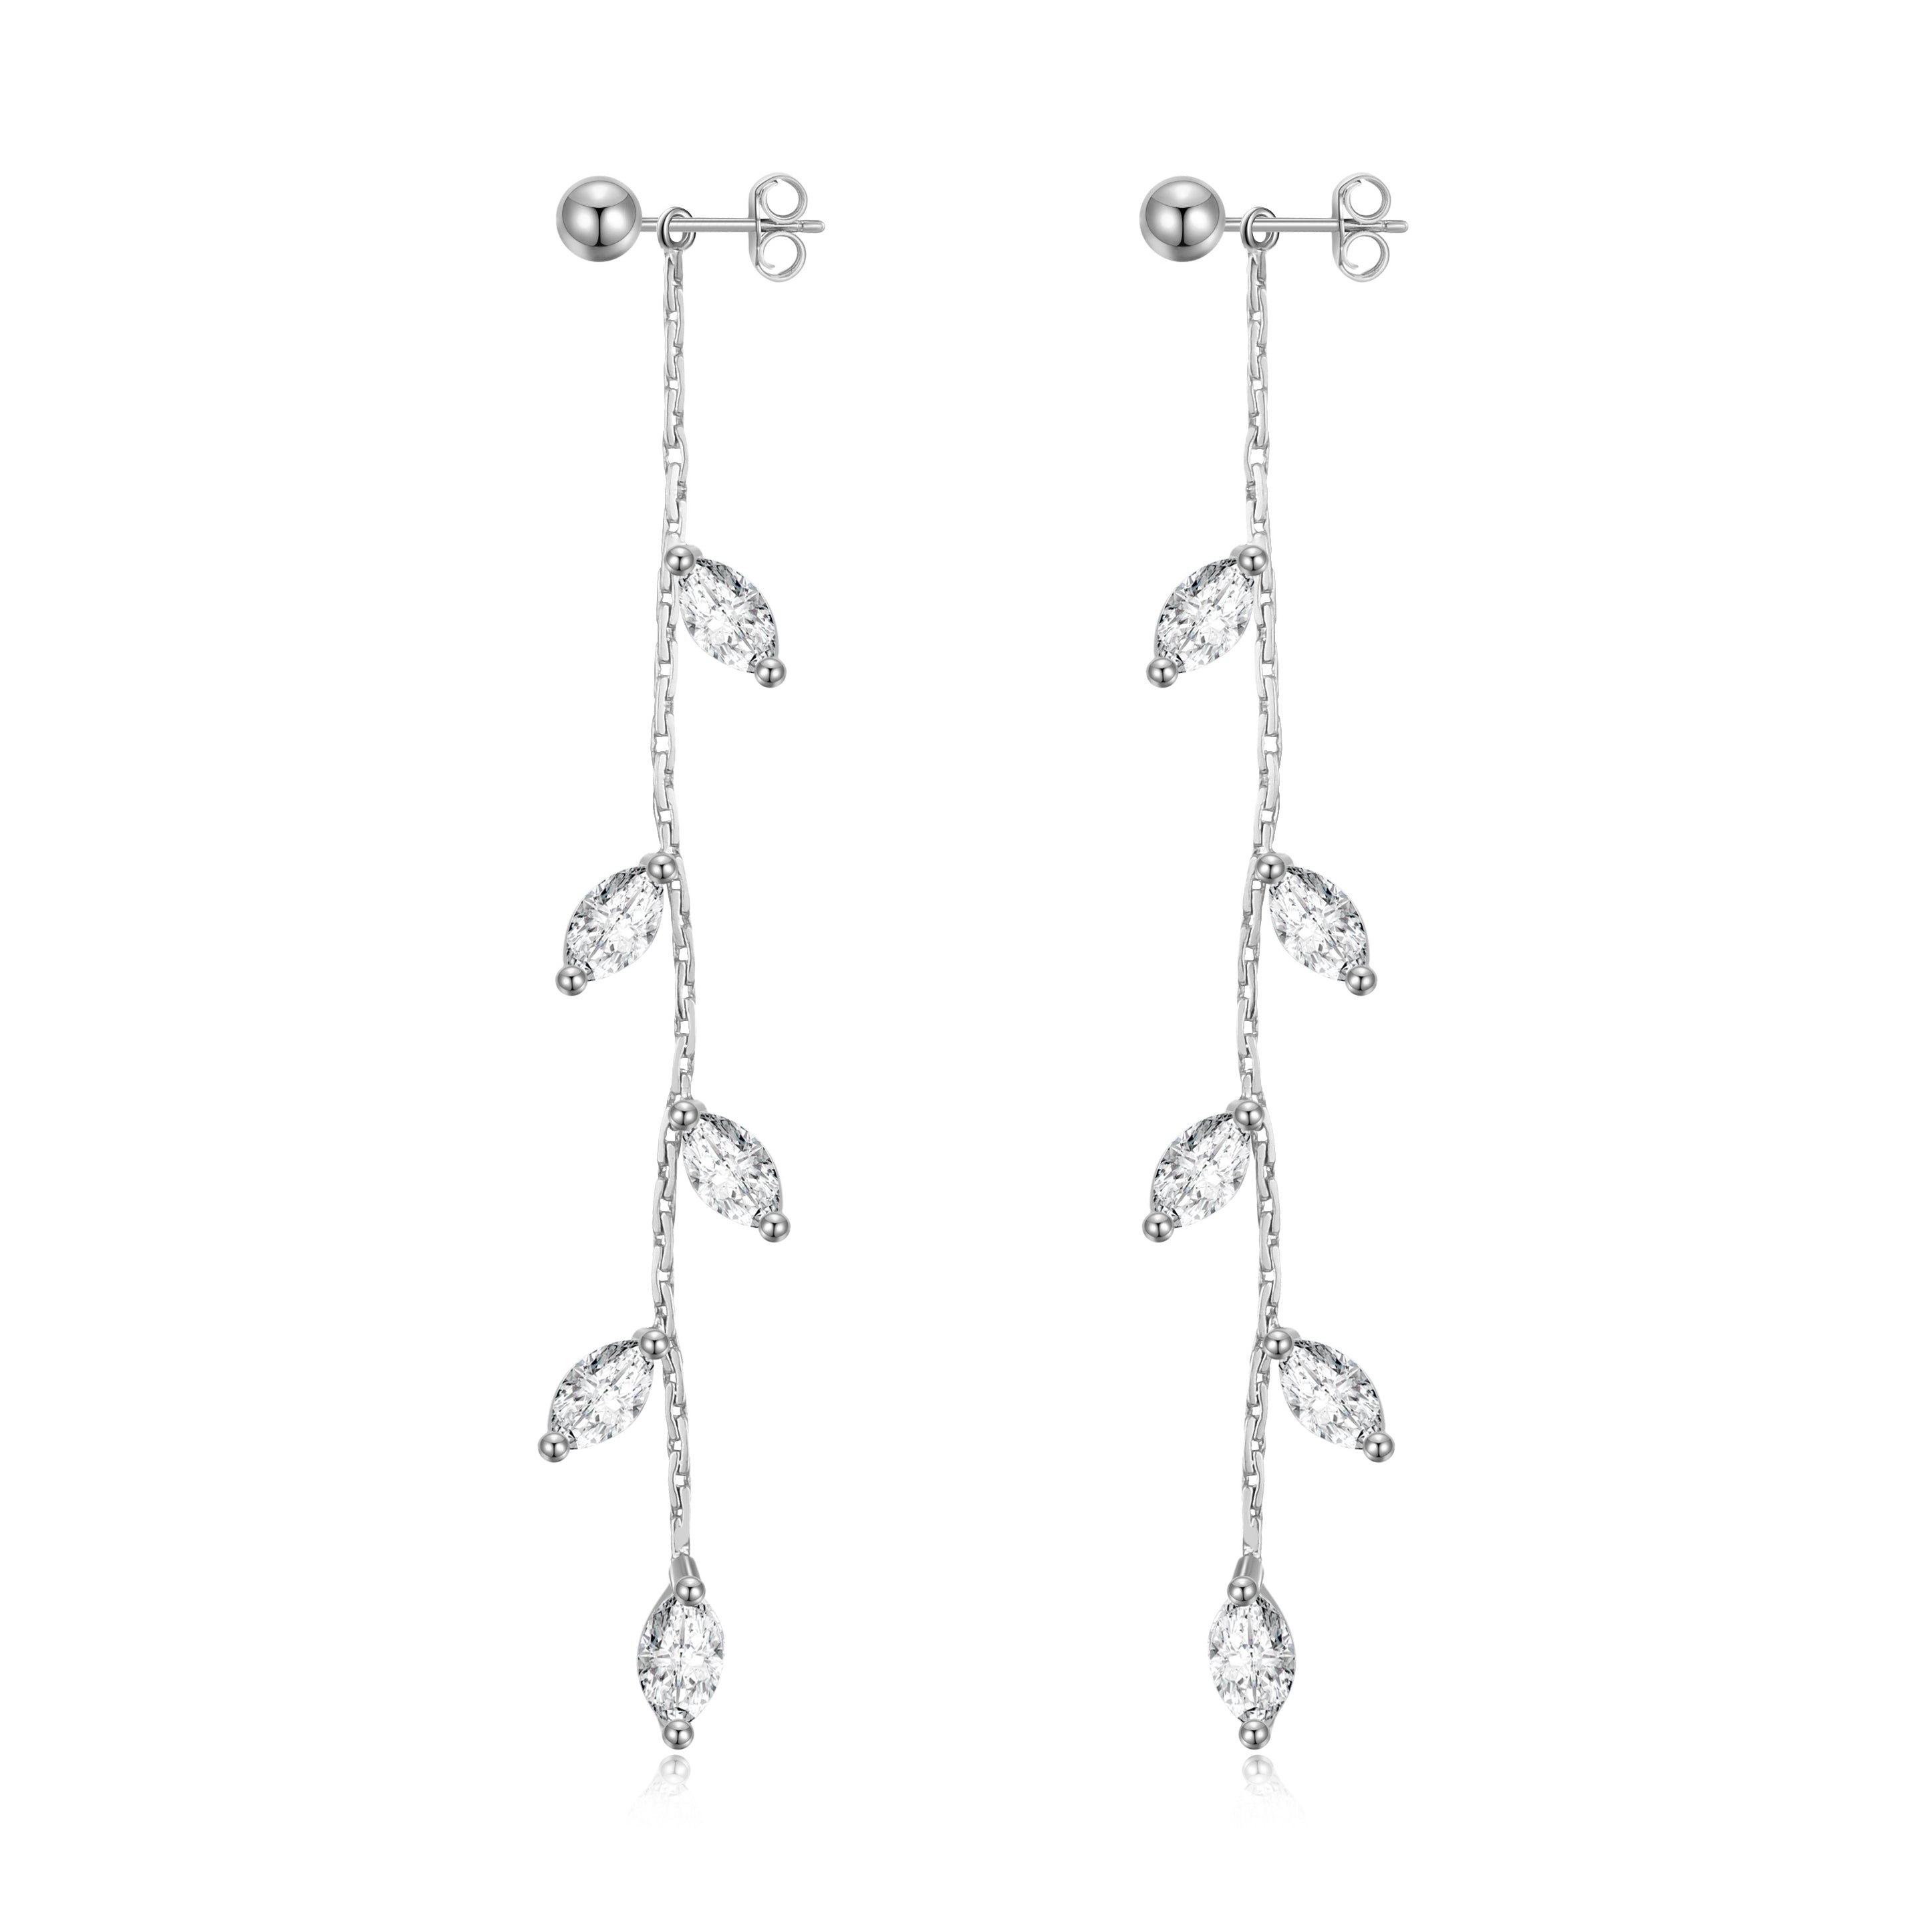 Silver Plated Leaf Dangle Earrings Created with Zircondia® Crystals by Philip Jones Jewellery